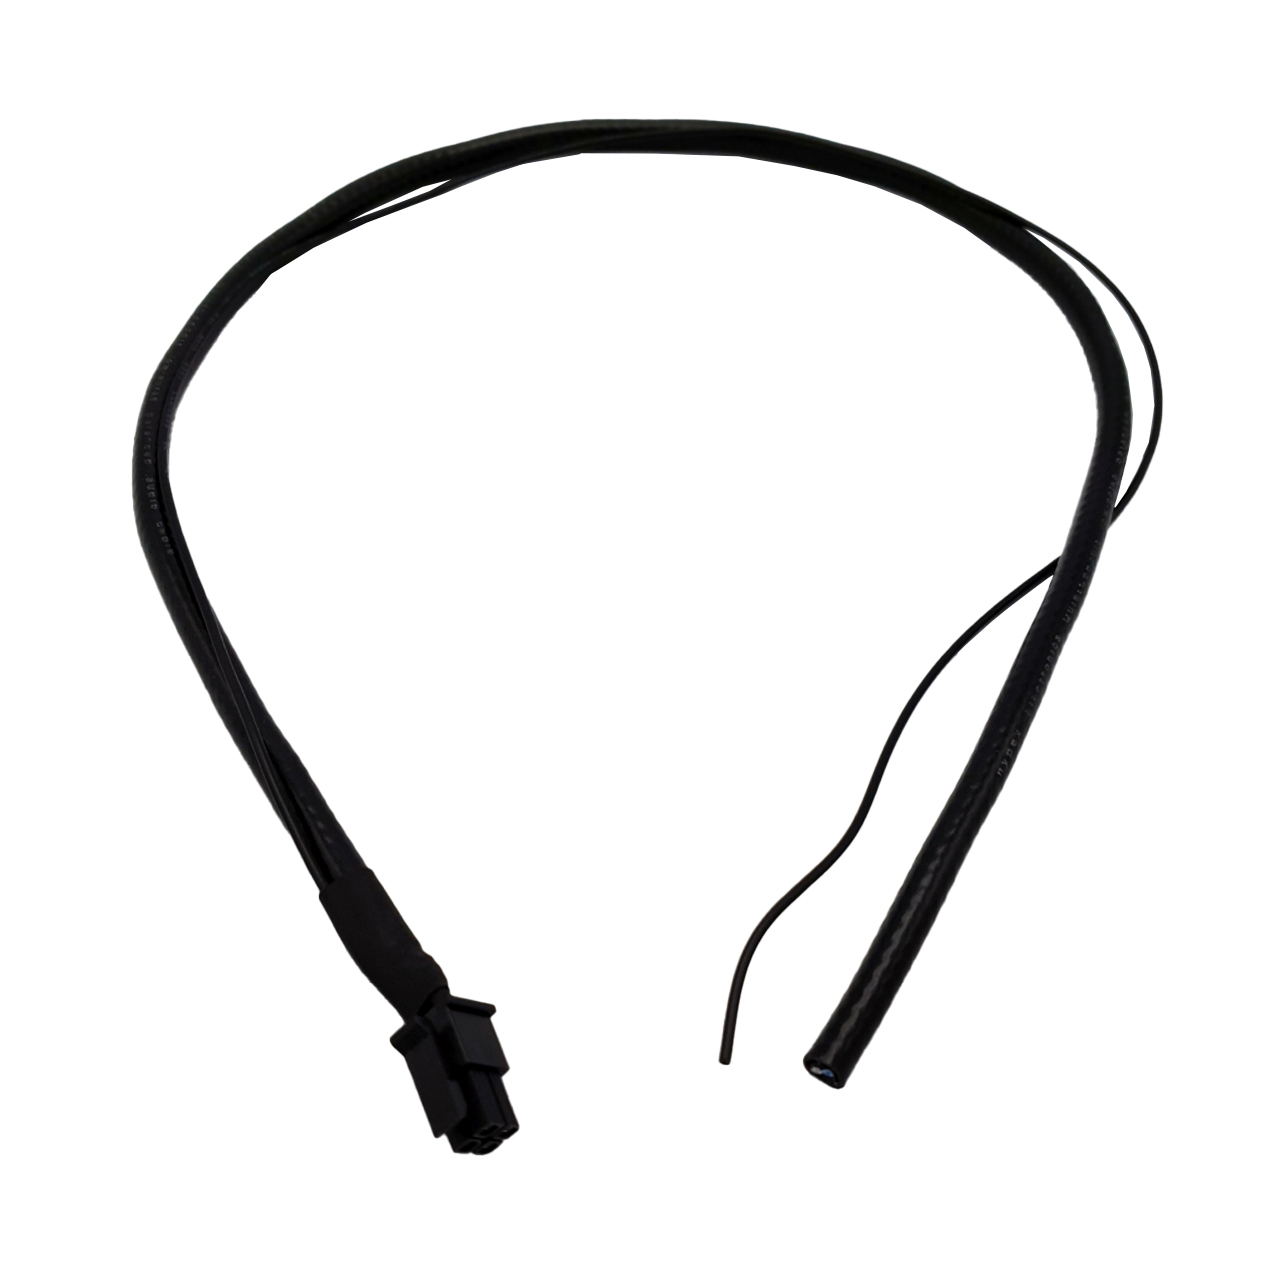 Ncore signal cable